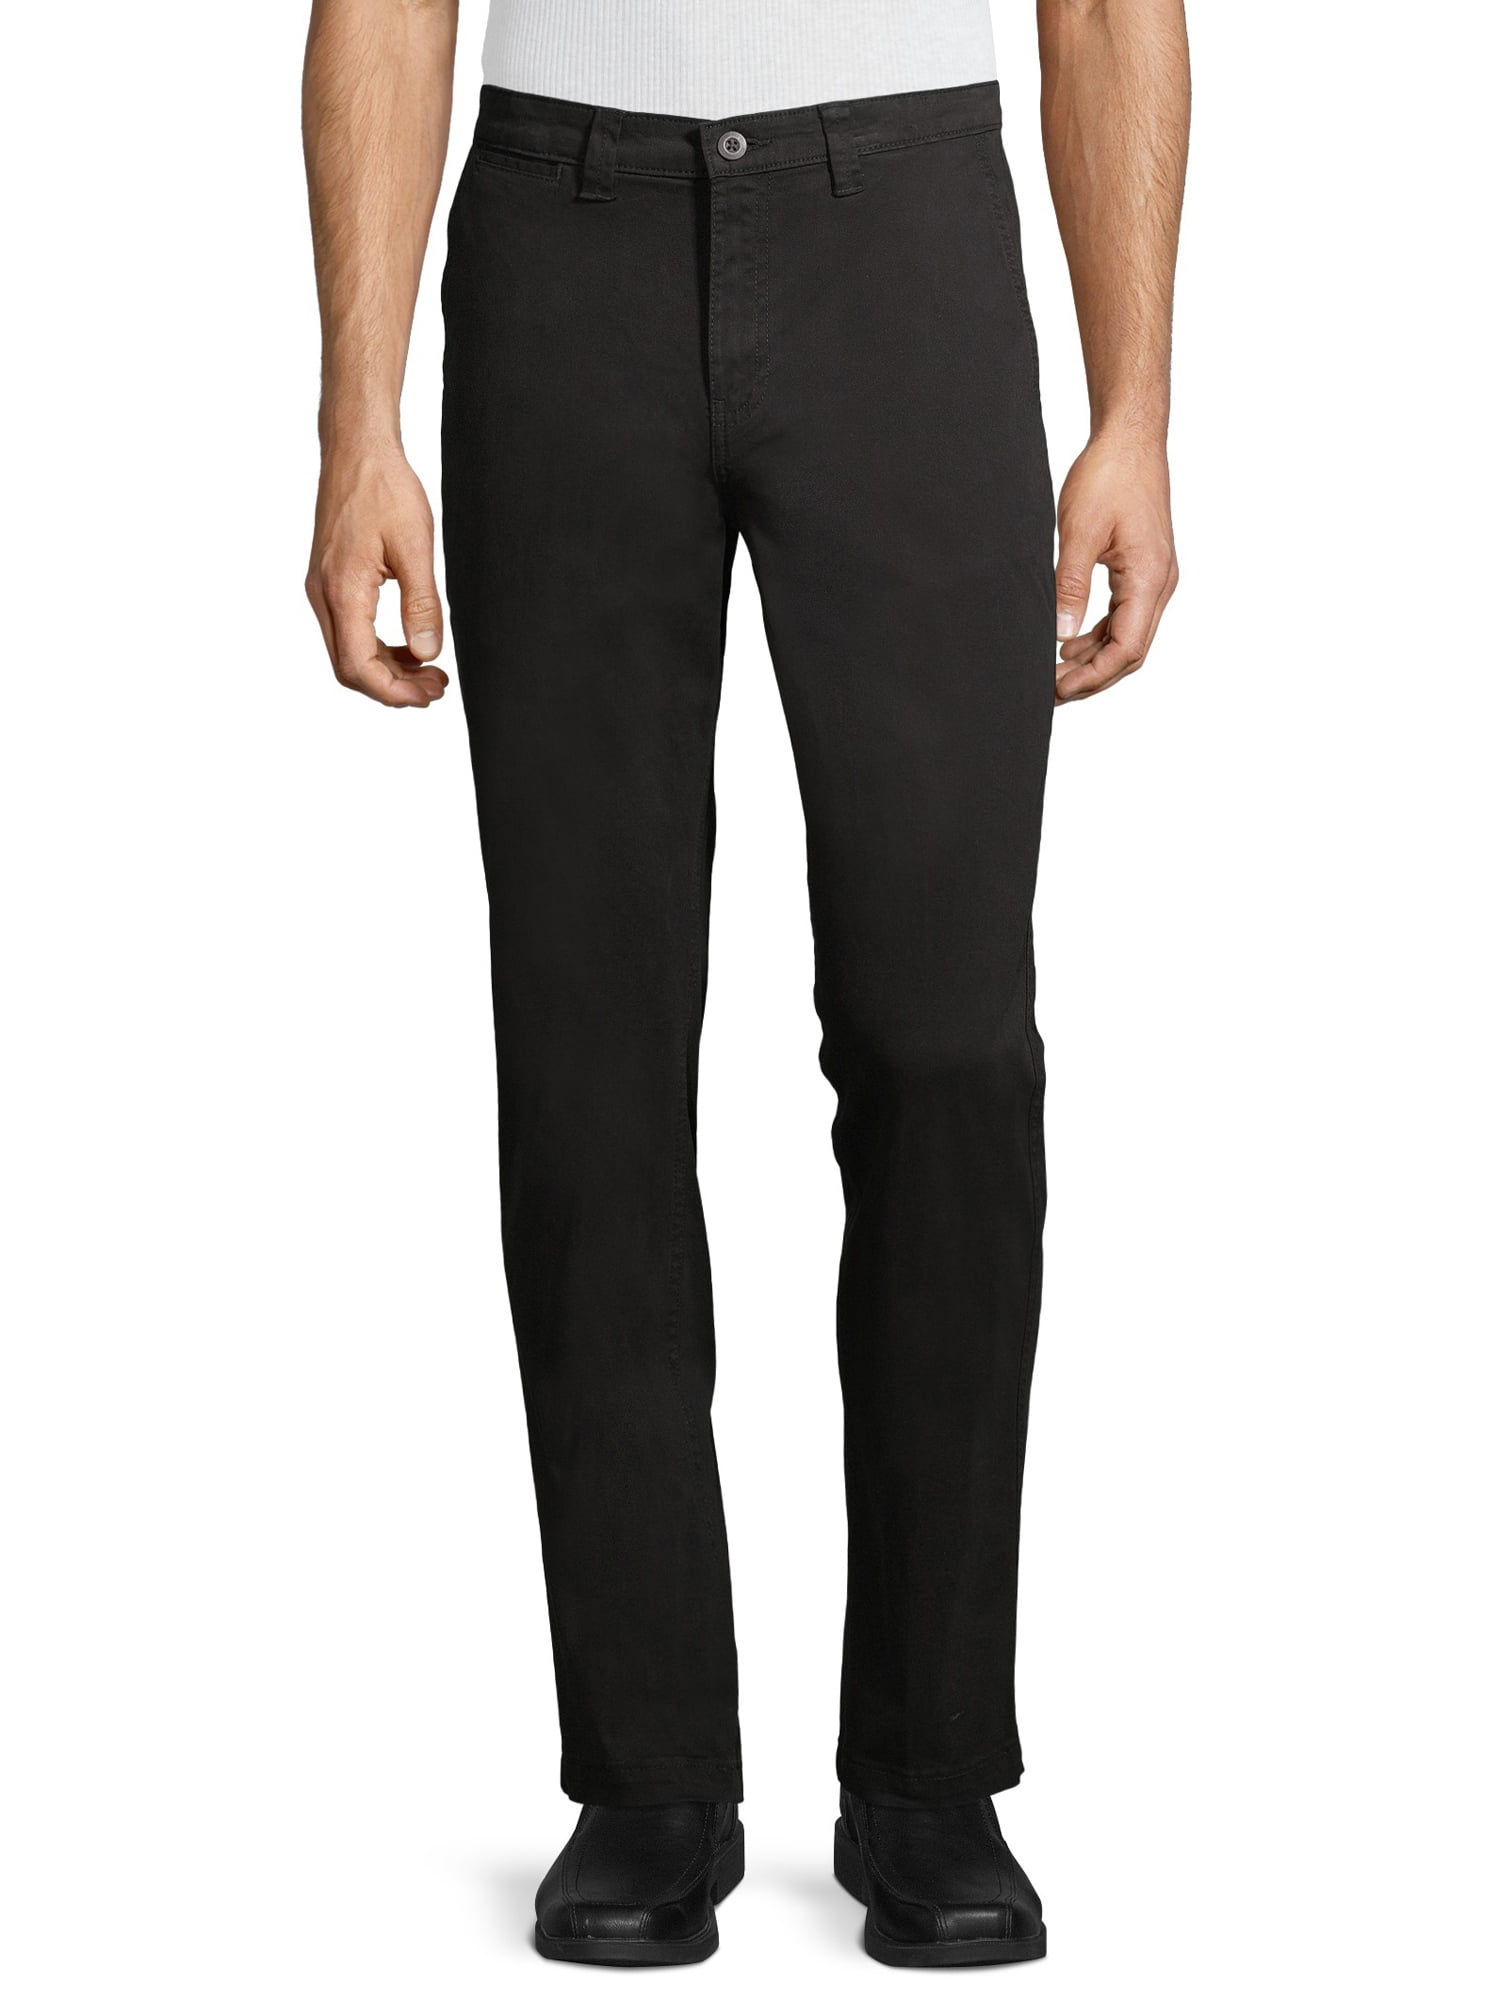 George Men's Athletic Fit Chino Pants 